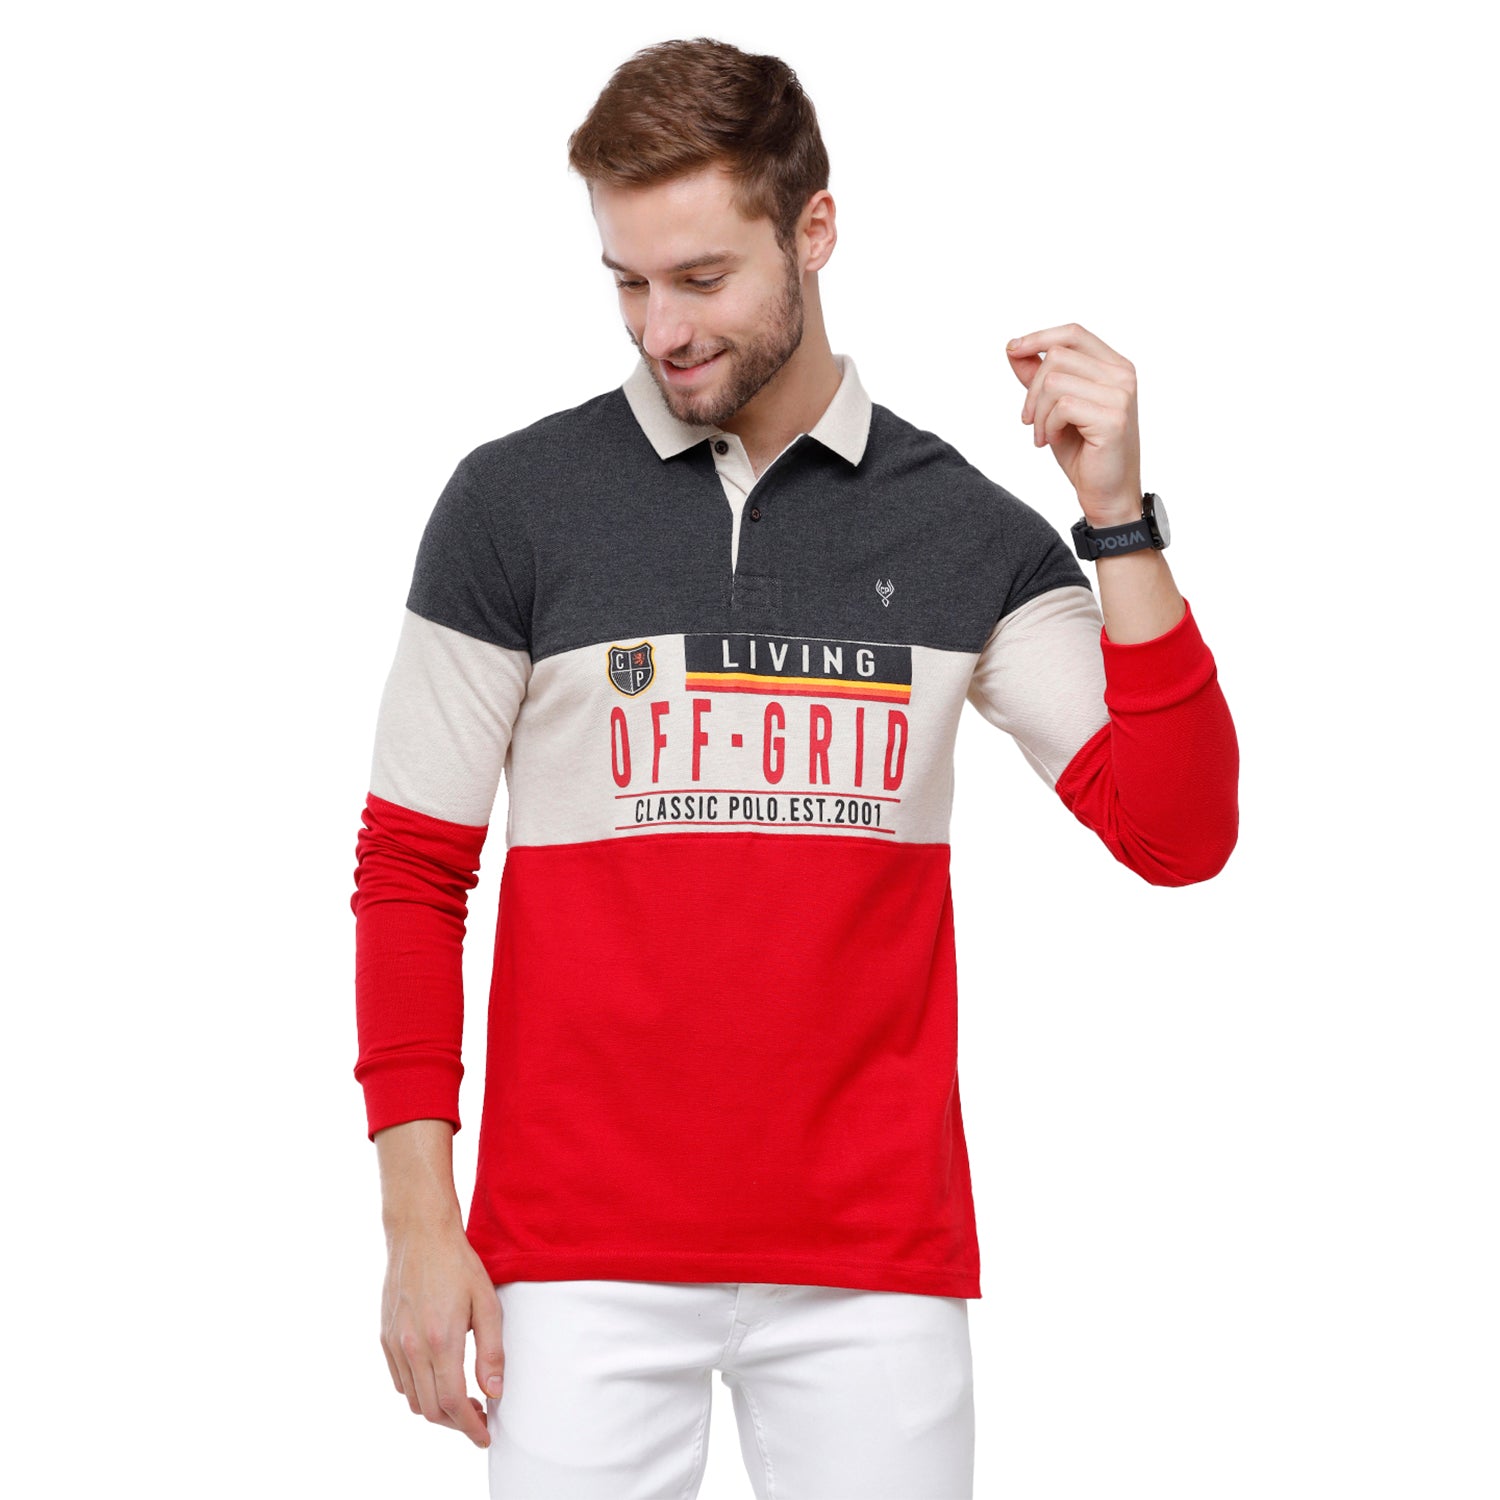 Classic Polo Men's Red & Grey Polo Full Sleeve Slim Fit T-Shirt -VERNO - 256 A T-shirt Classic Polo 